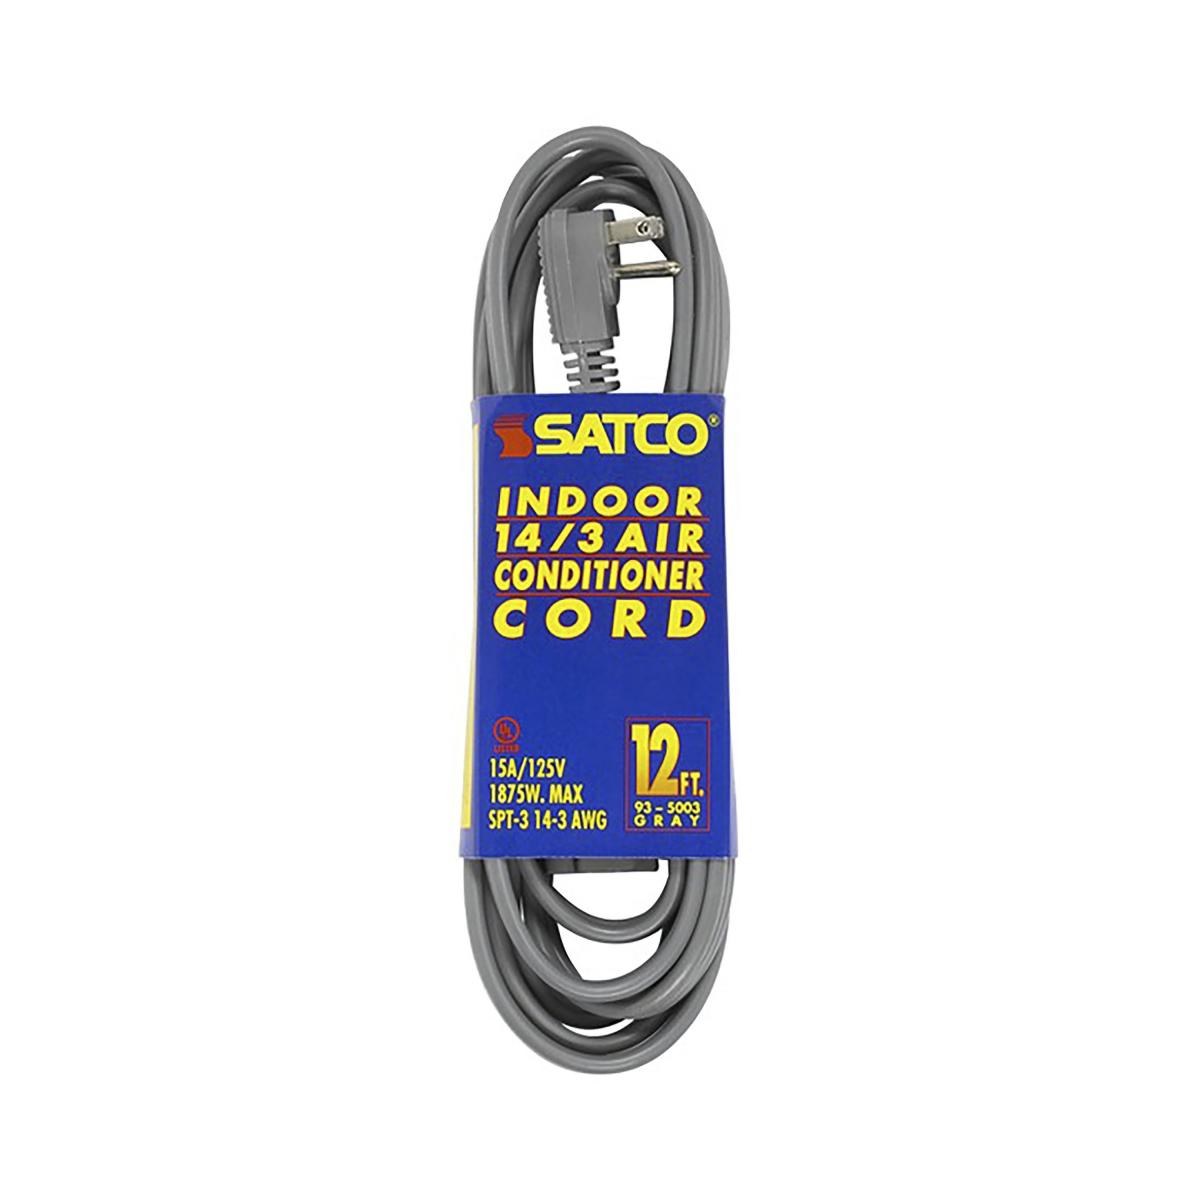 Satco 93-5003 12 Foot Gray Heavy Duty Air Conditioner/Appliance Cord 14/3 Ga. SPT-3 Gray Cord With Sleeve 15A-125V 1875W